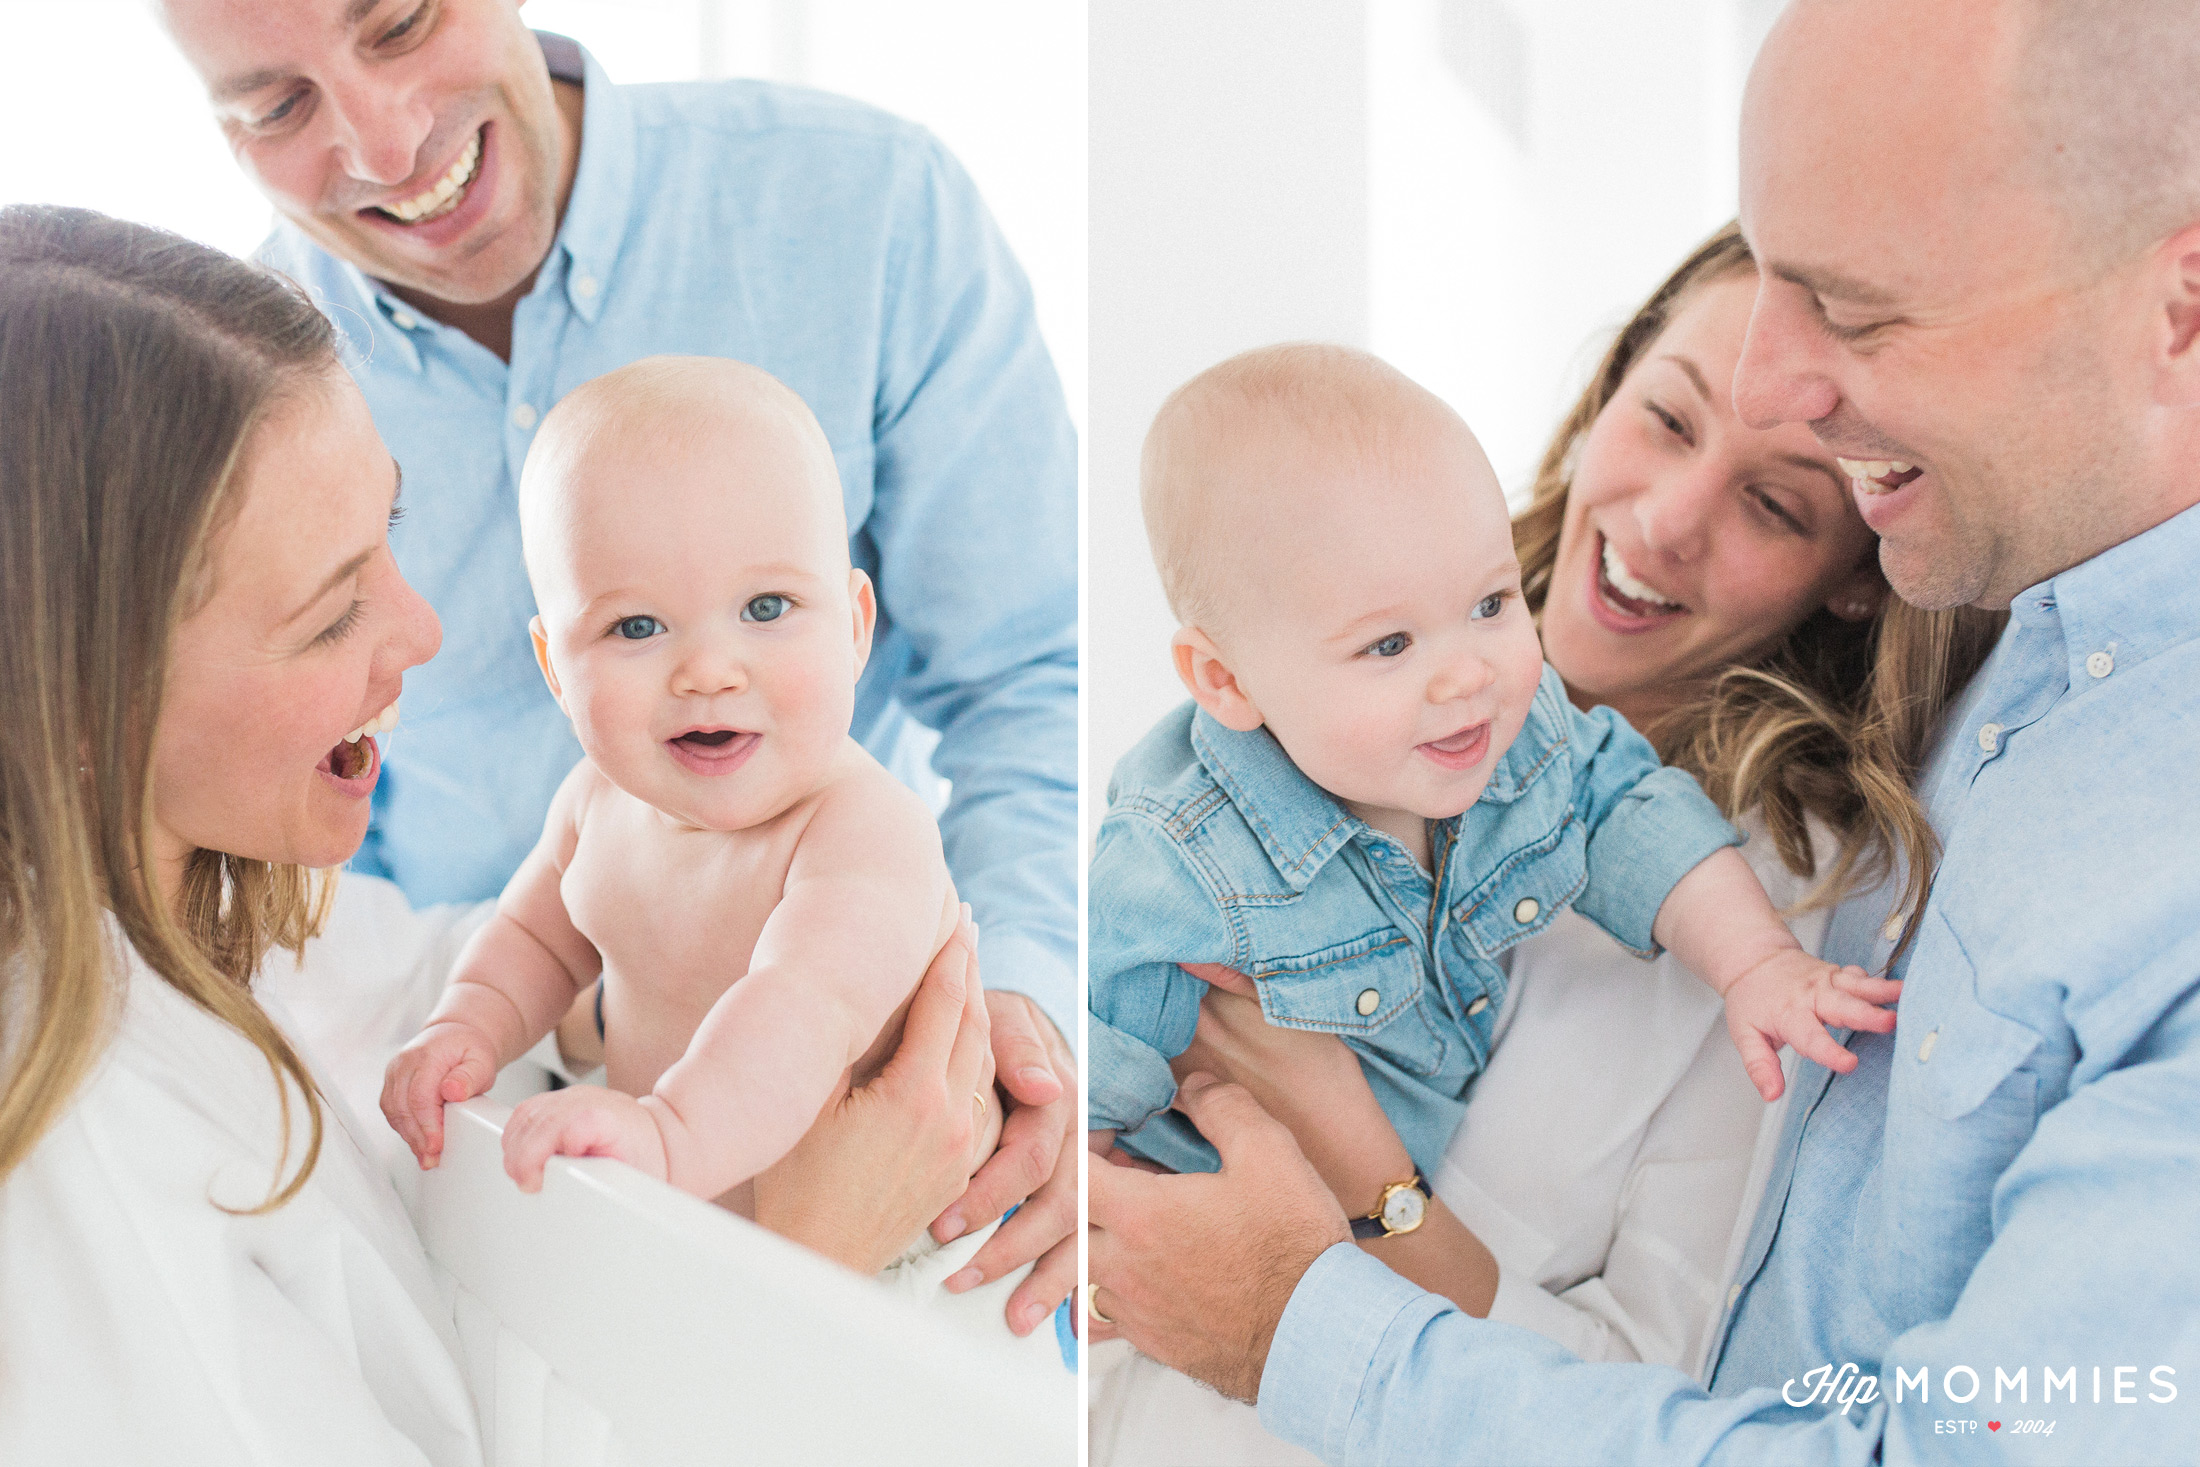 Tips for family Photos from Elza Photographie